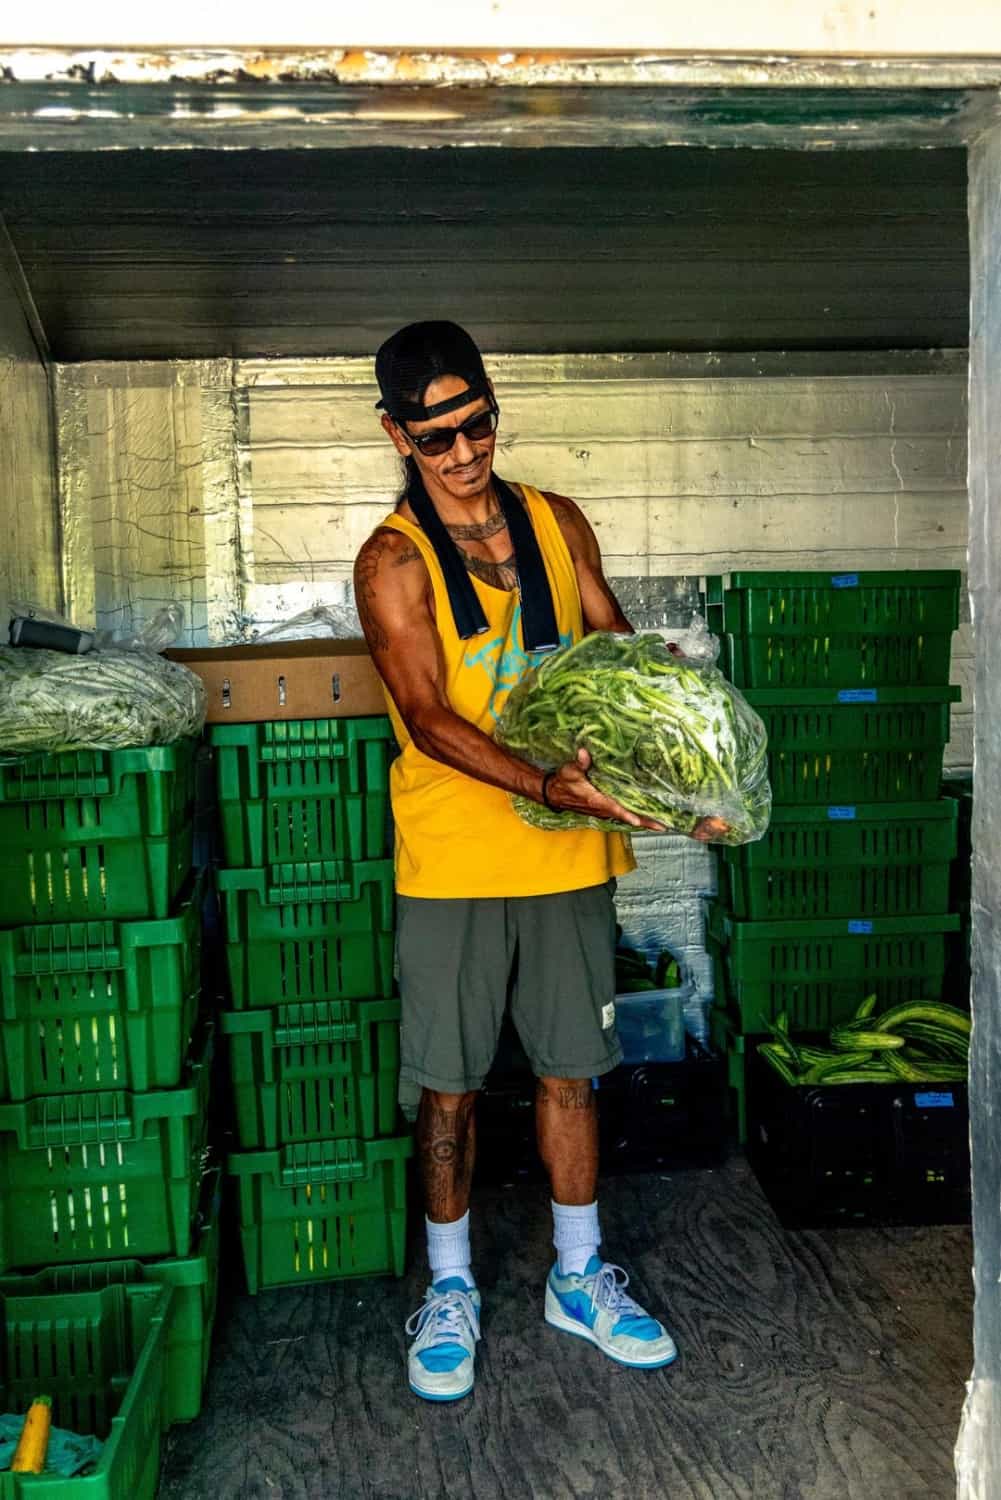 Alfred showing off freshly harvested green beans stored in his cooler